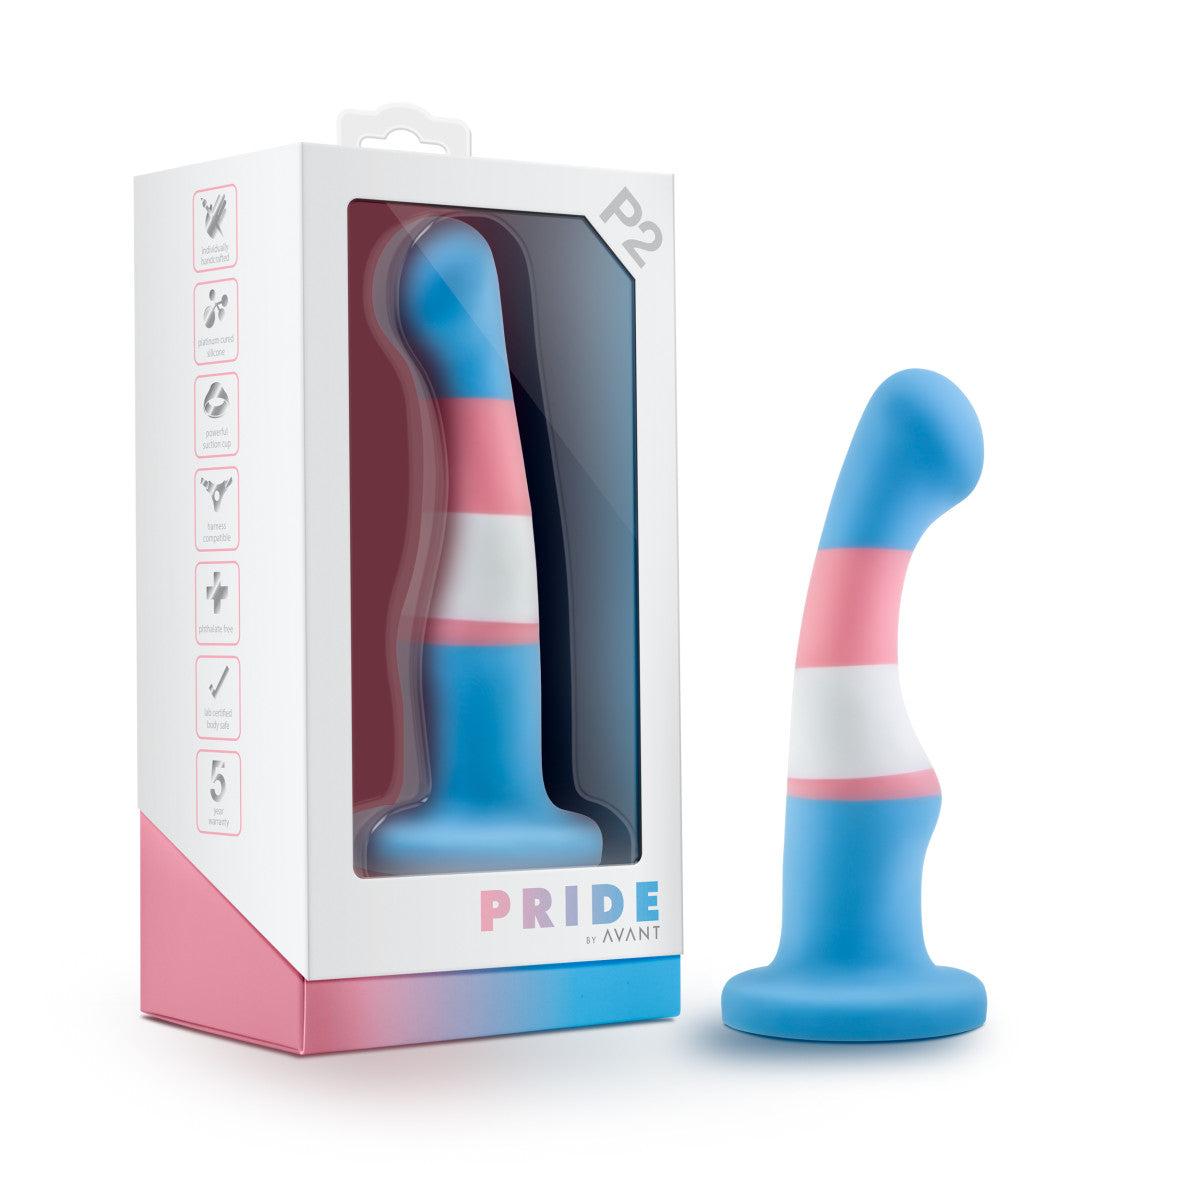 Blush Avant | Pride True Blue P2: Artisan 6 Inch Curved P-Spot / G-Spot Dildo with Suction Cup Base - Elegantly Made with Smooth Ultrasilk® Purio™ Silicone